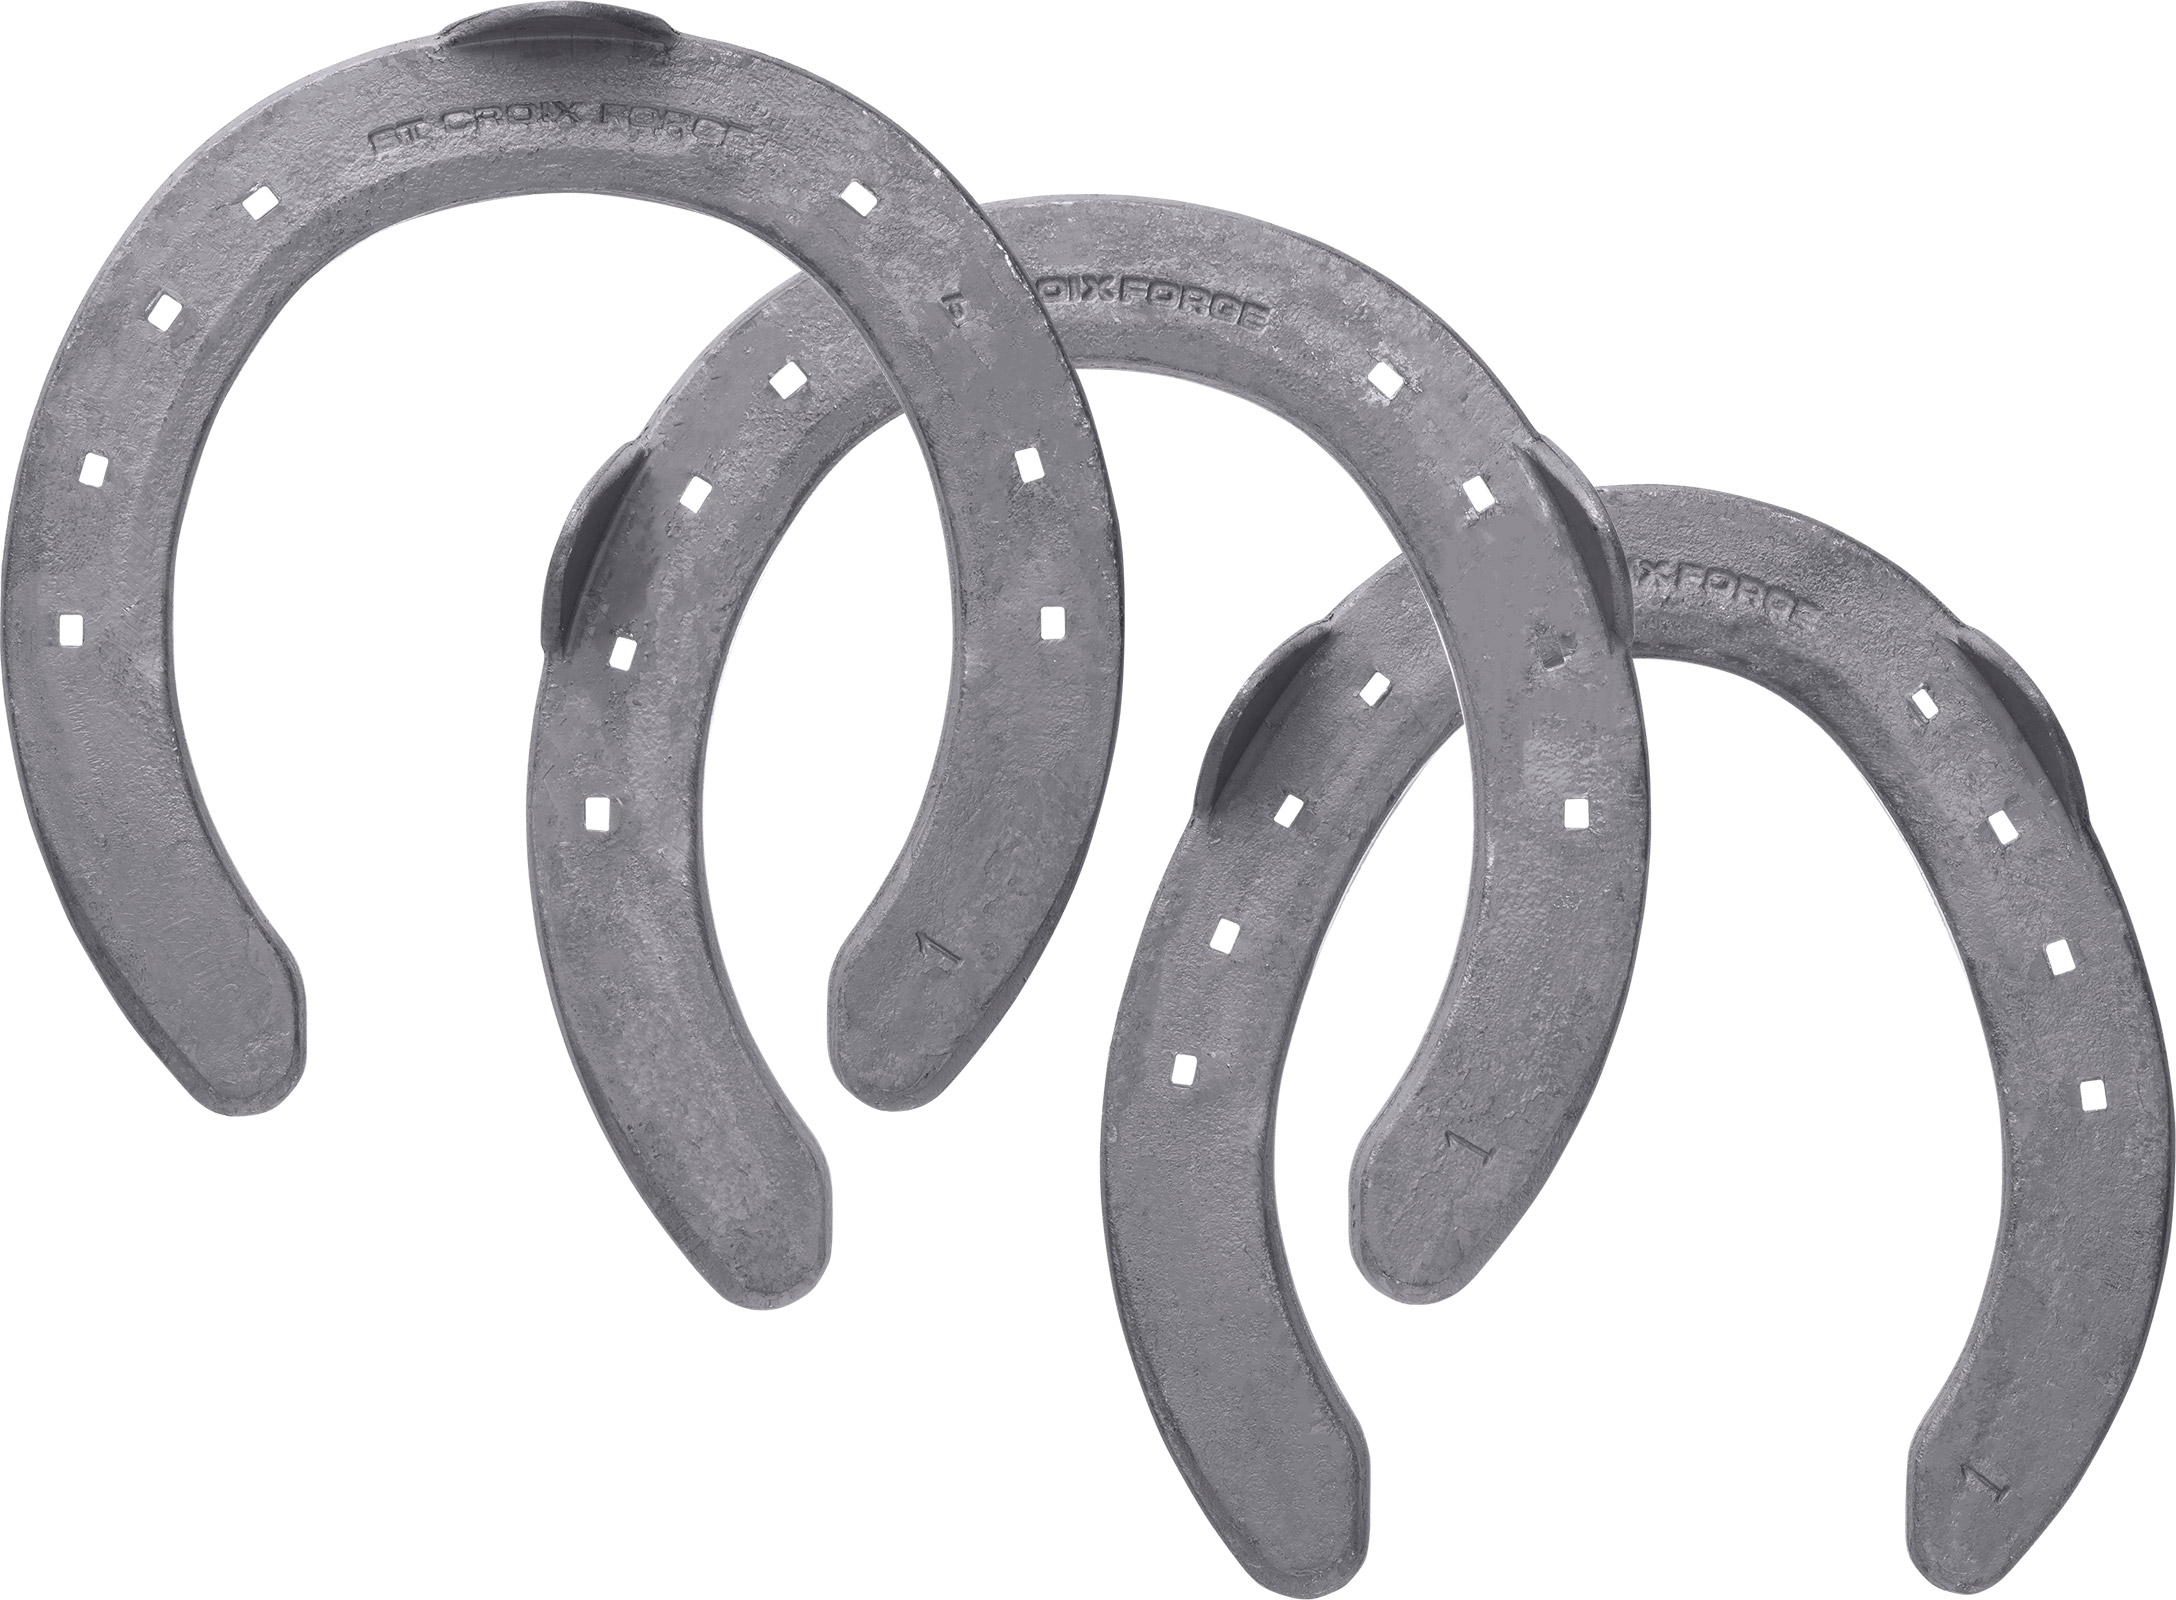 St. Croix Eventer Plus Steel horseshoes, front toe clip and side clips, hind side clips, hoof side view